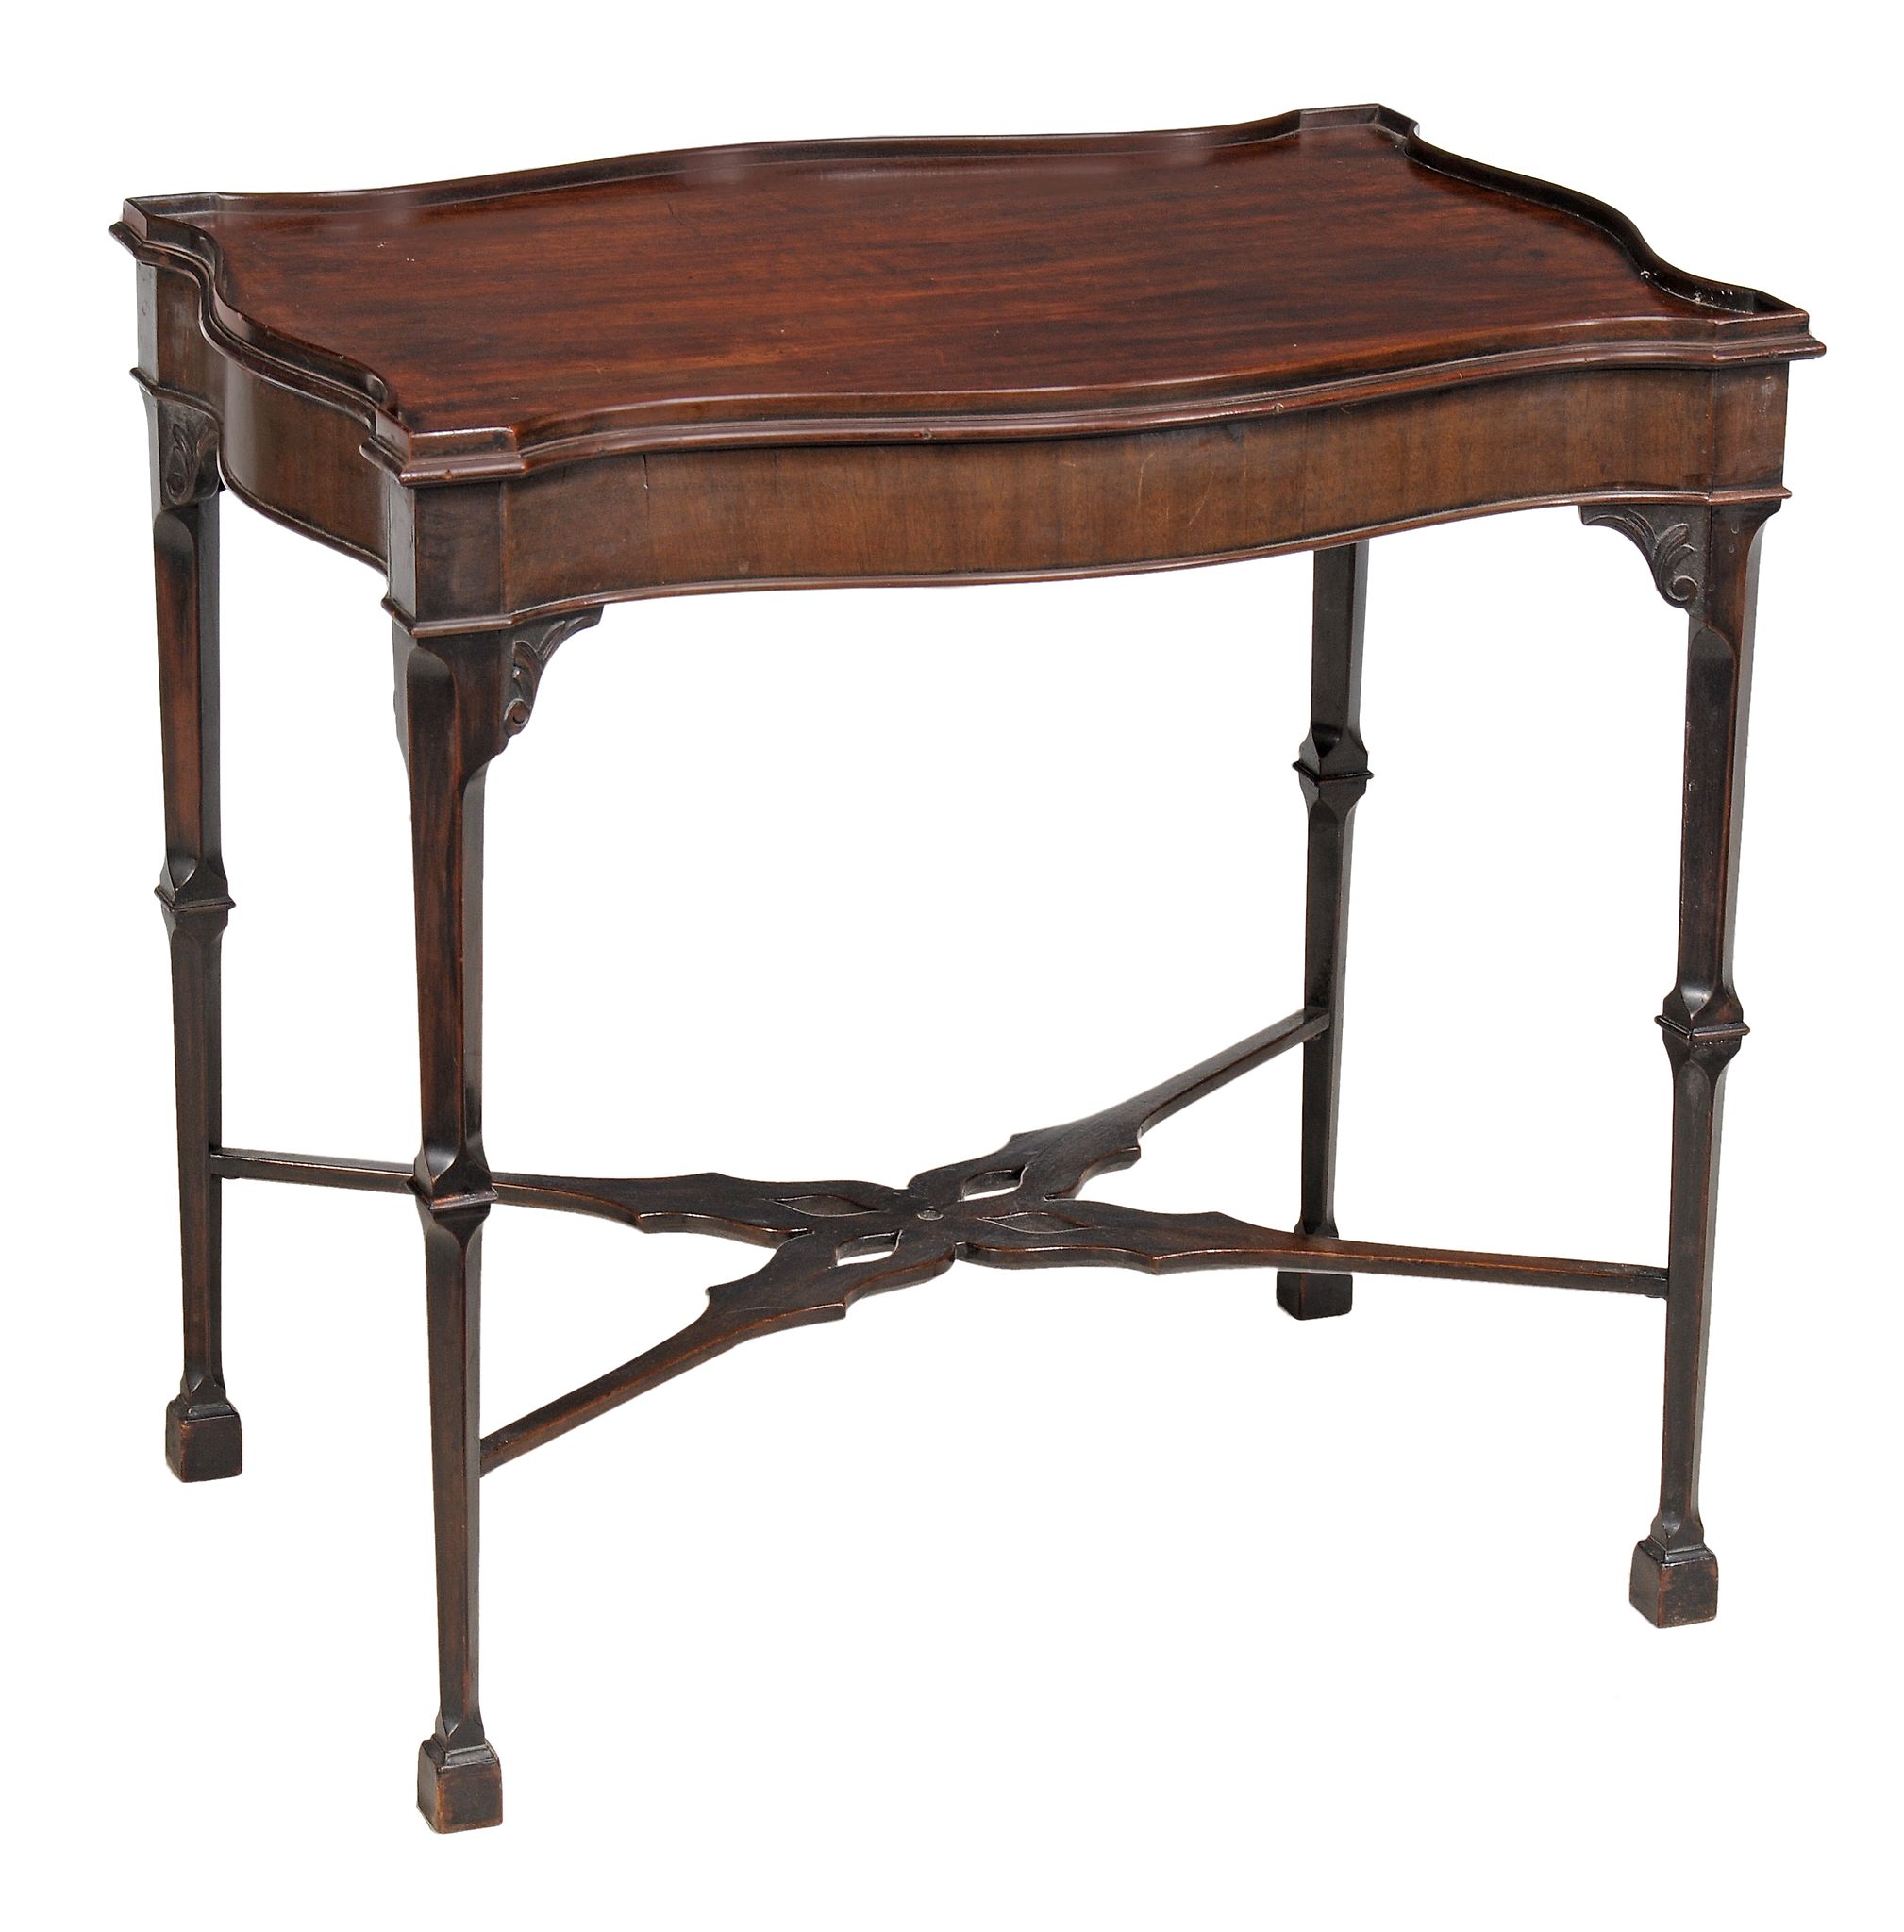 A mahogany silver table in George III style  A mahogany silver table in George III style,   late